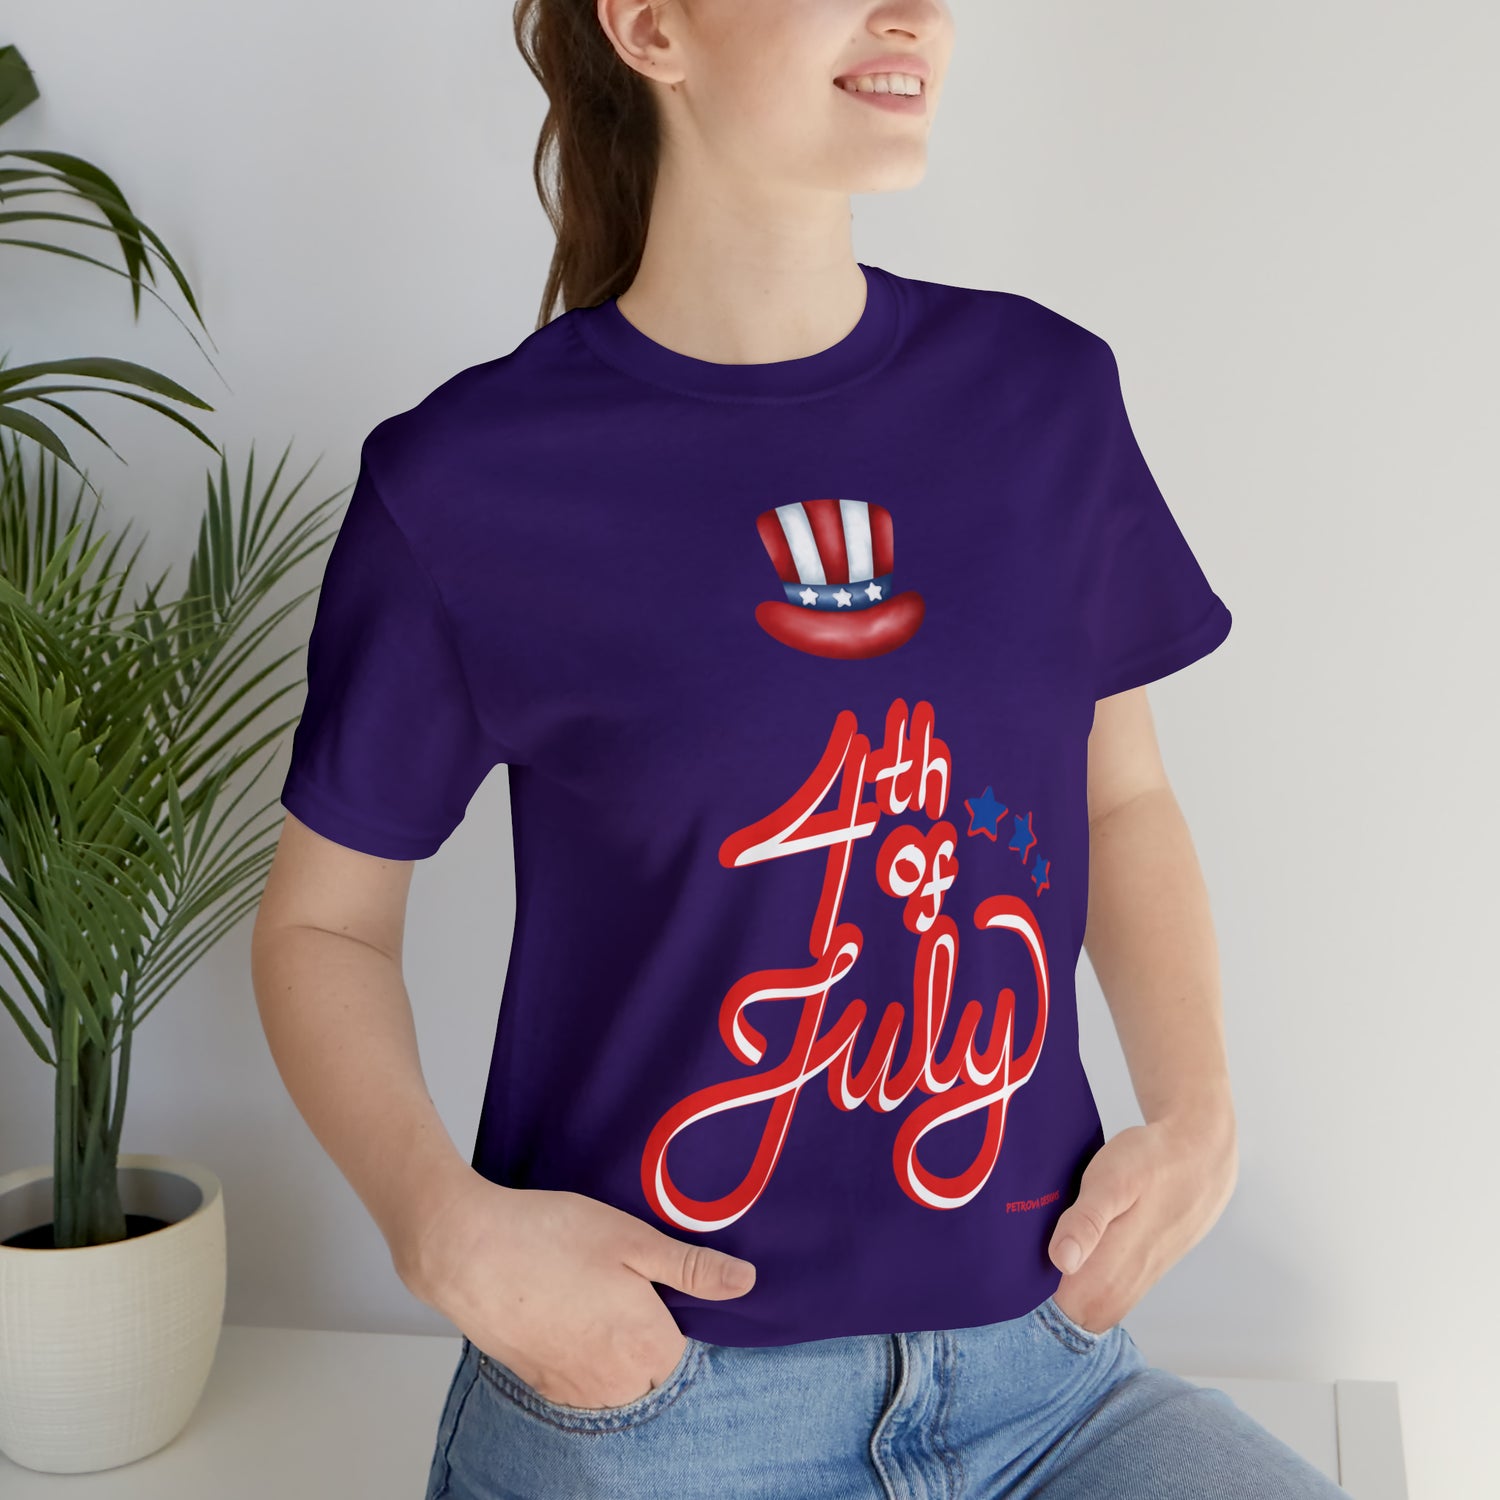 Team Purple T-Shirt Tshirt Design Gift for Friend and Family Short Sleeved Shirt 4th of July Independence Day Petrova Designs